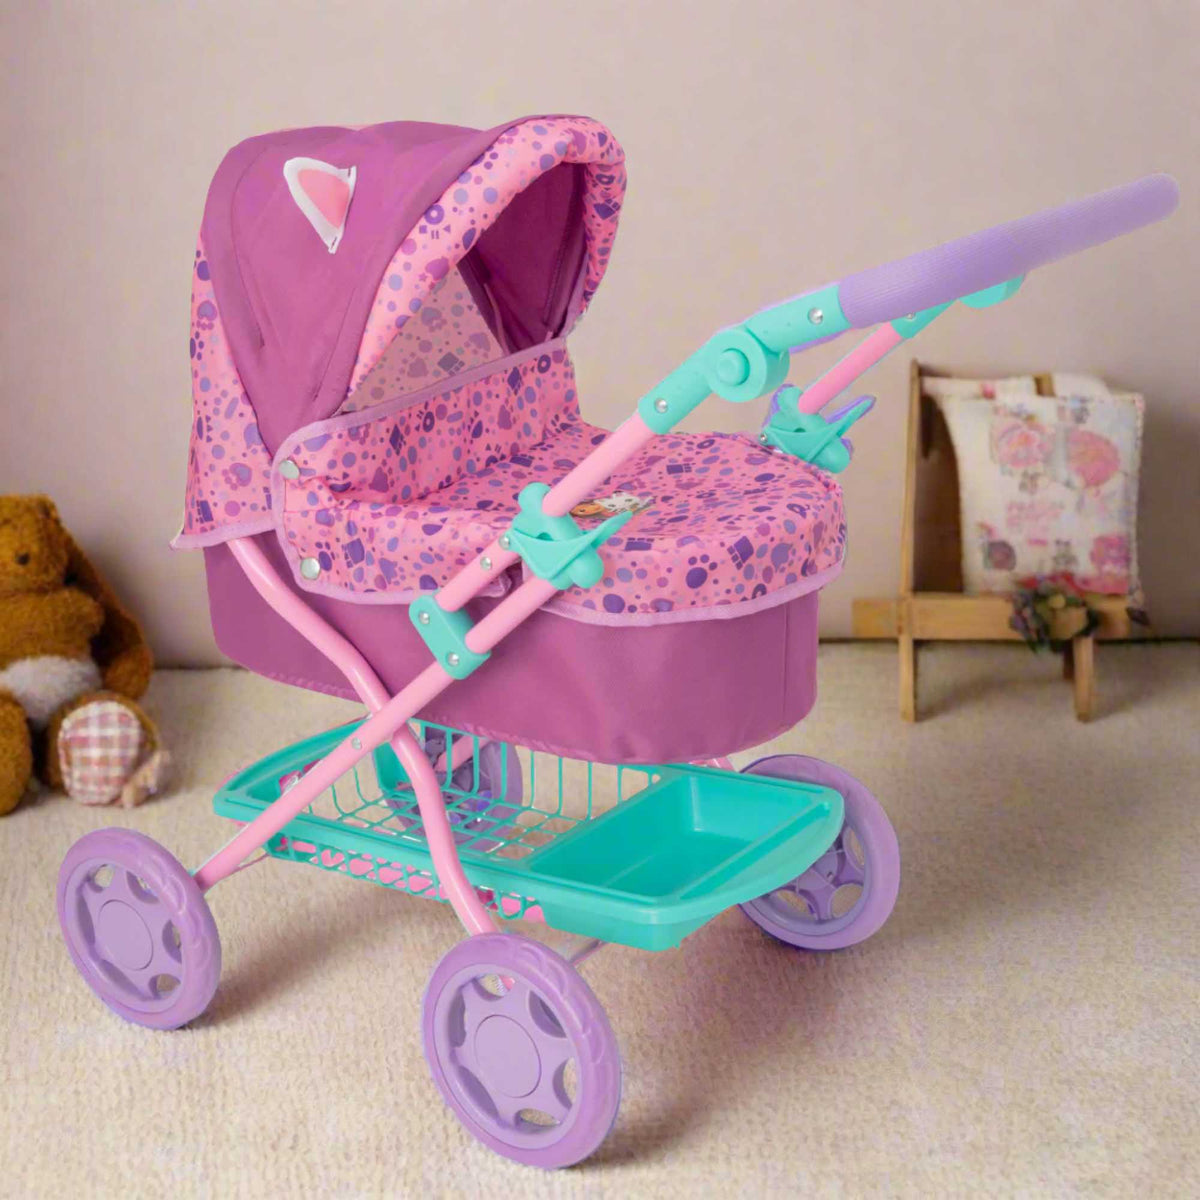 Adorable and colourful toy pram inspired by Gabby&#39;s Dollhouse, perfect for children to transport their favourite dolls and stuffed animals. Features include a sturdy frame, easy-to-push wheels, and playful designs with popular characters from the show. 